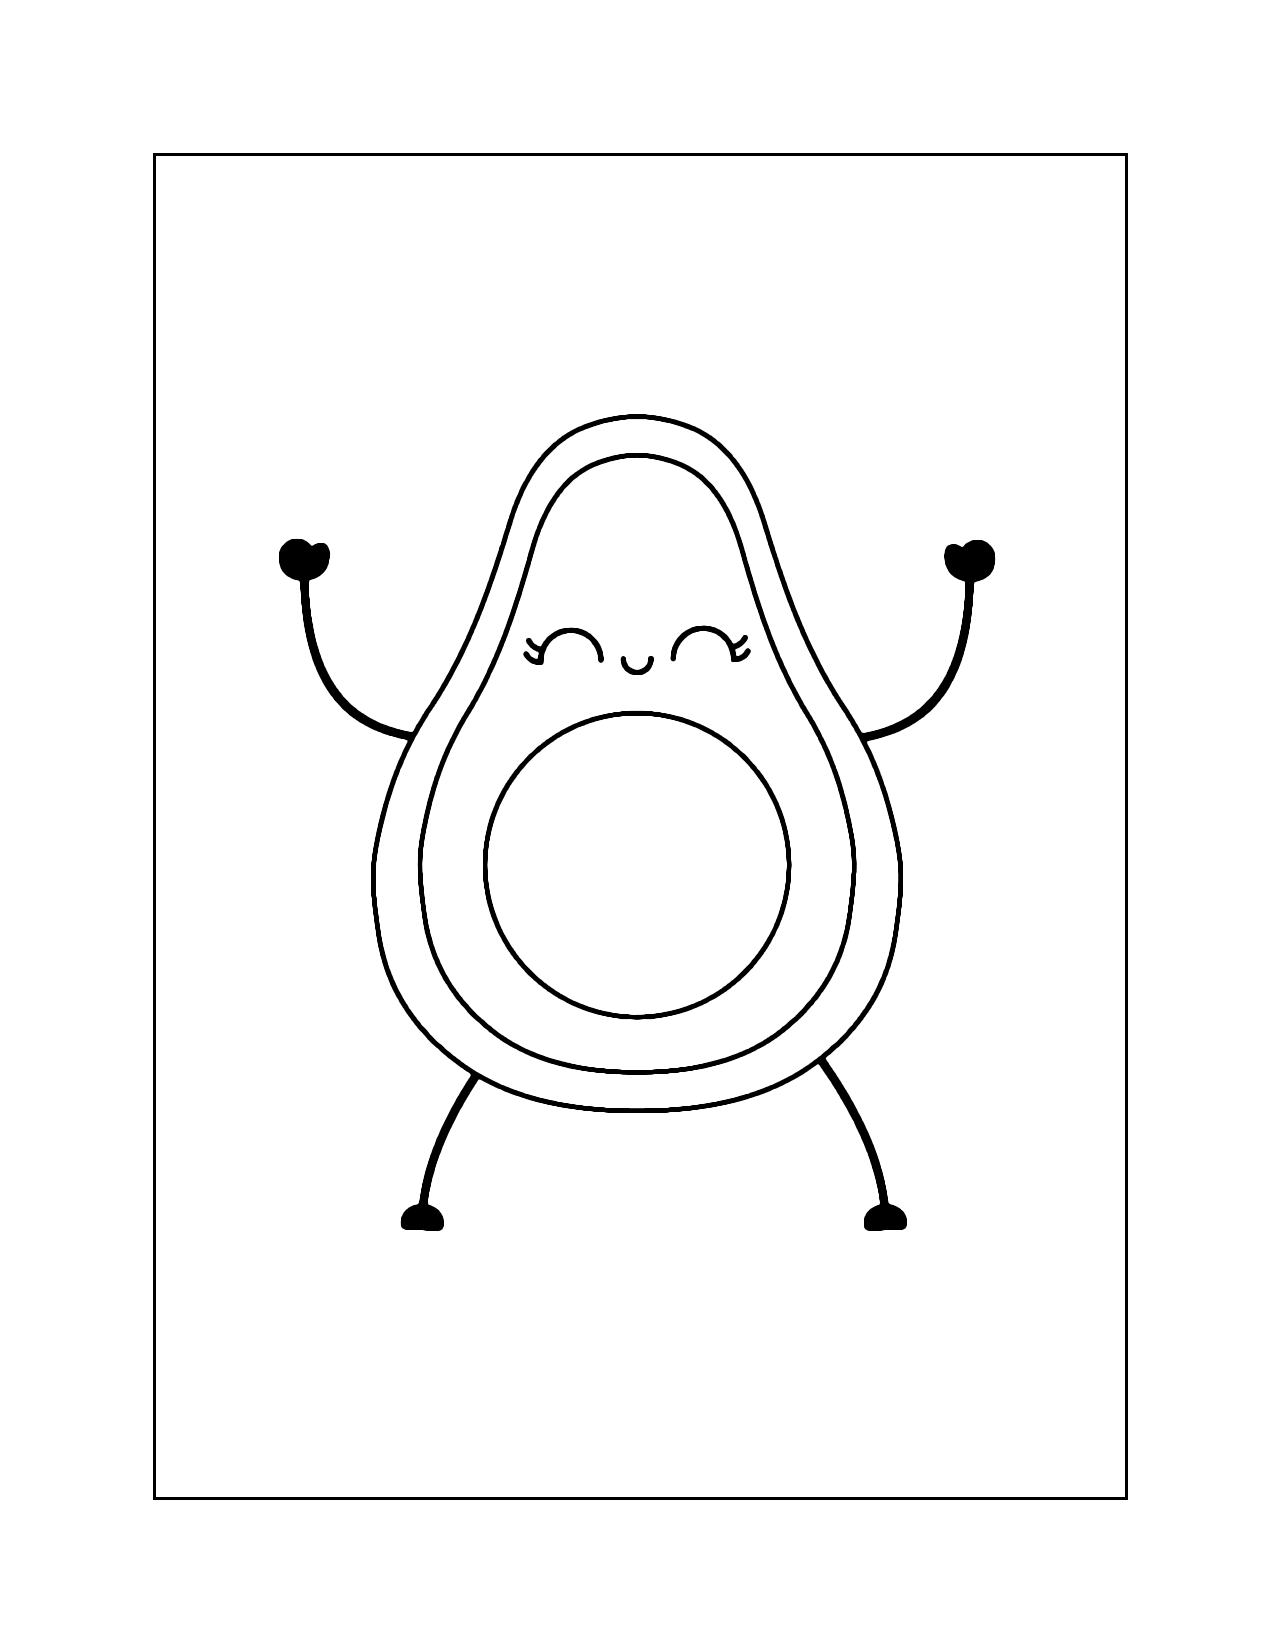 Cute Avocado Character Coloring Page